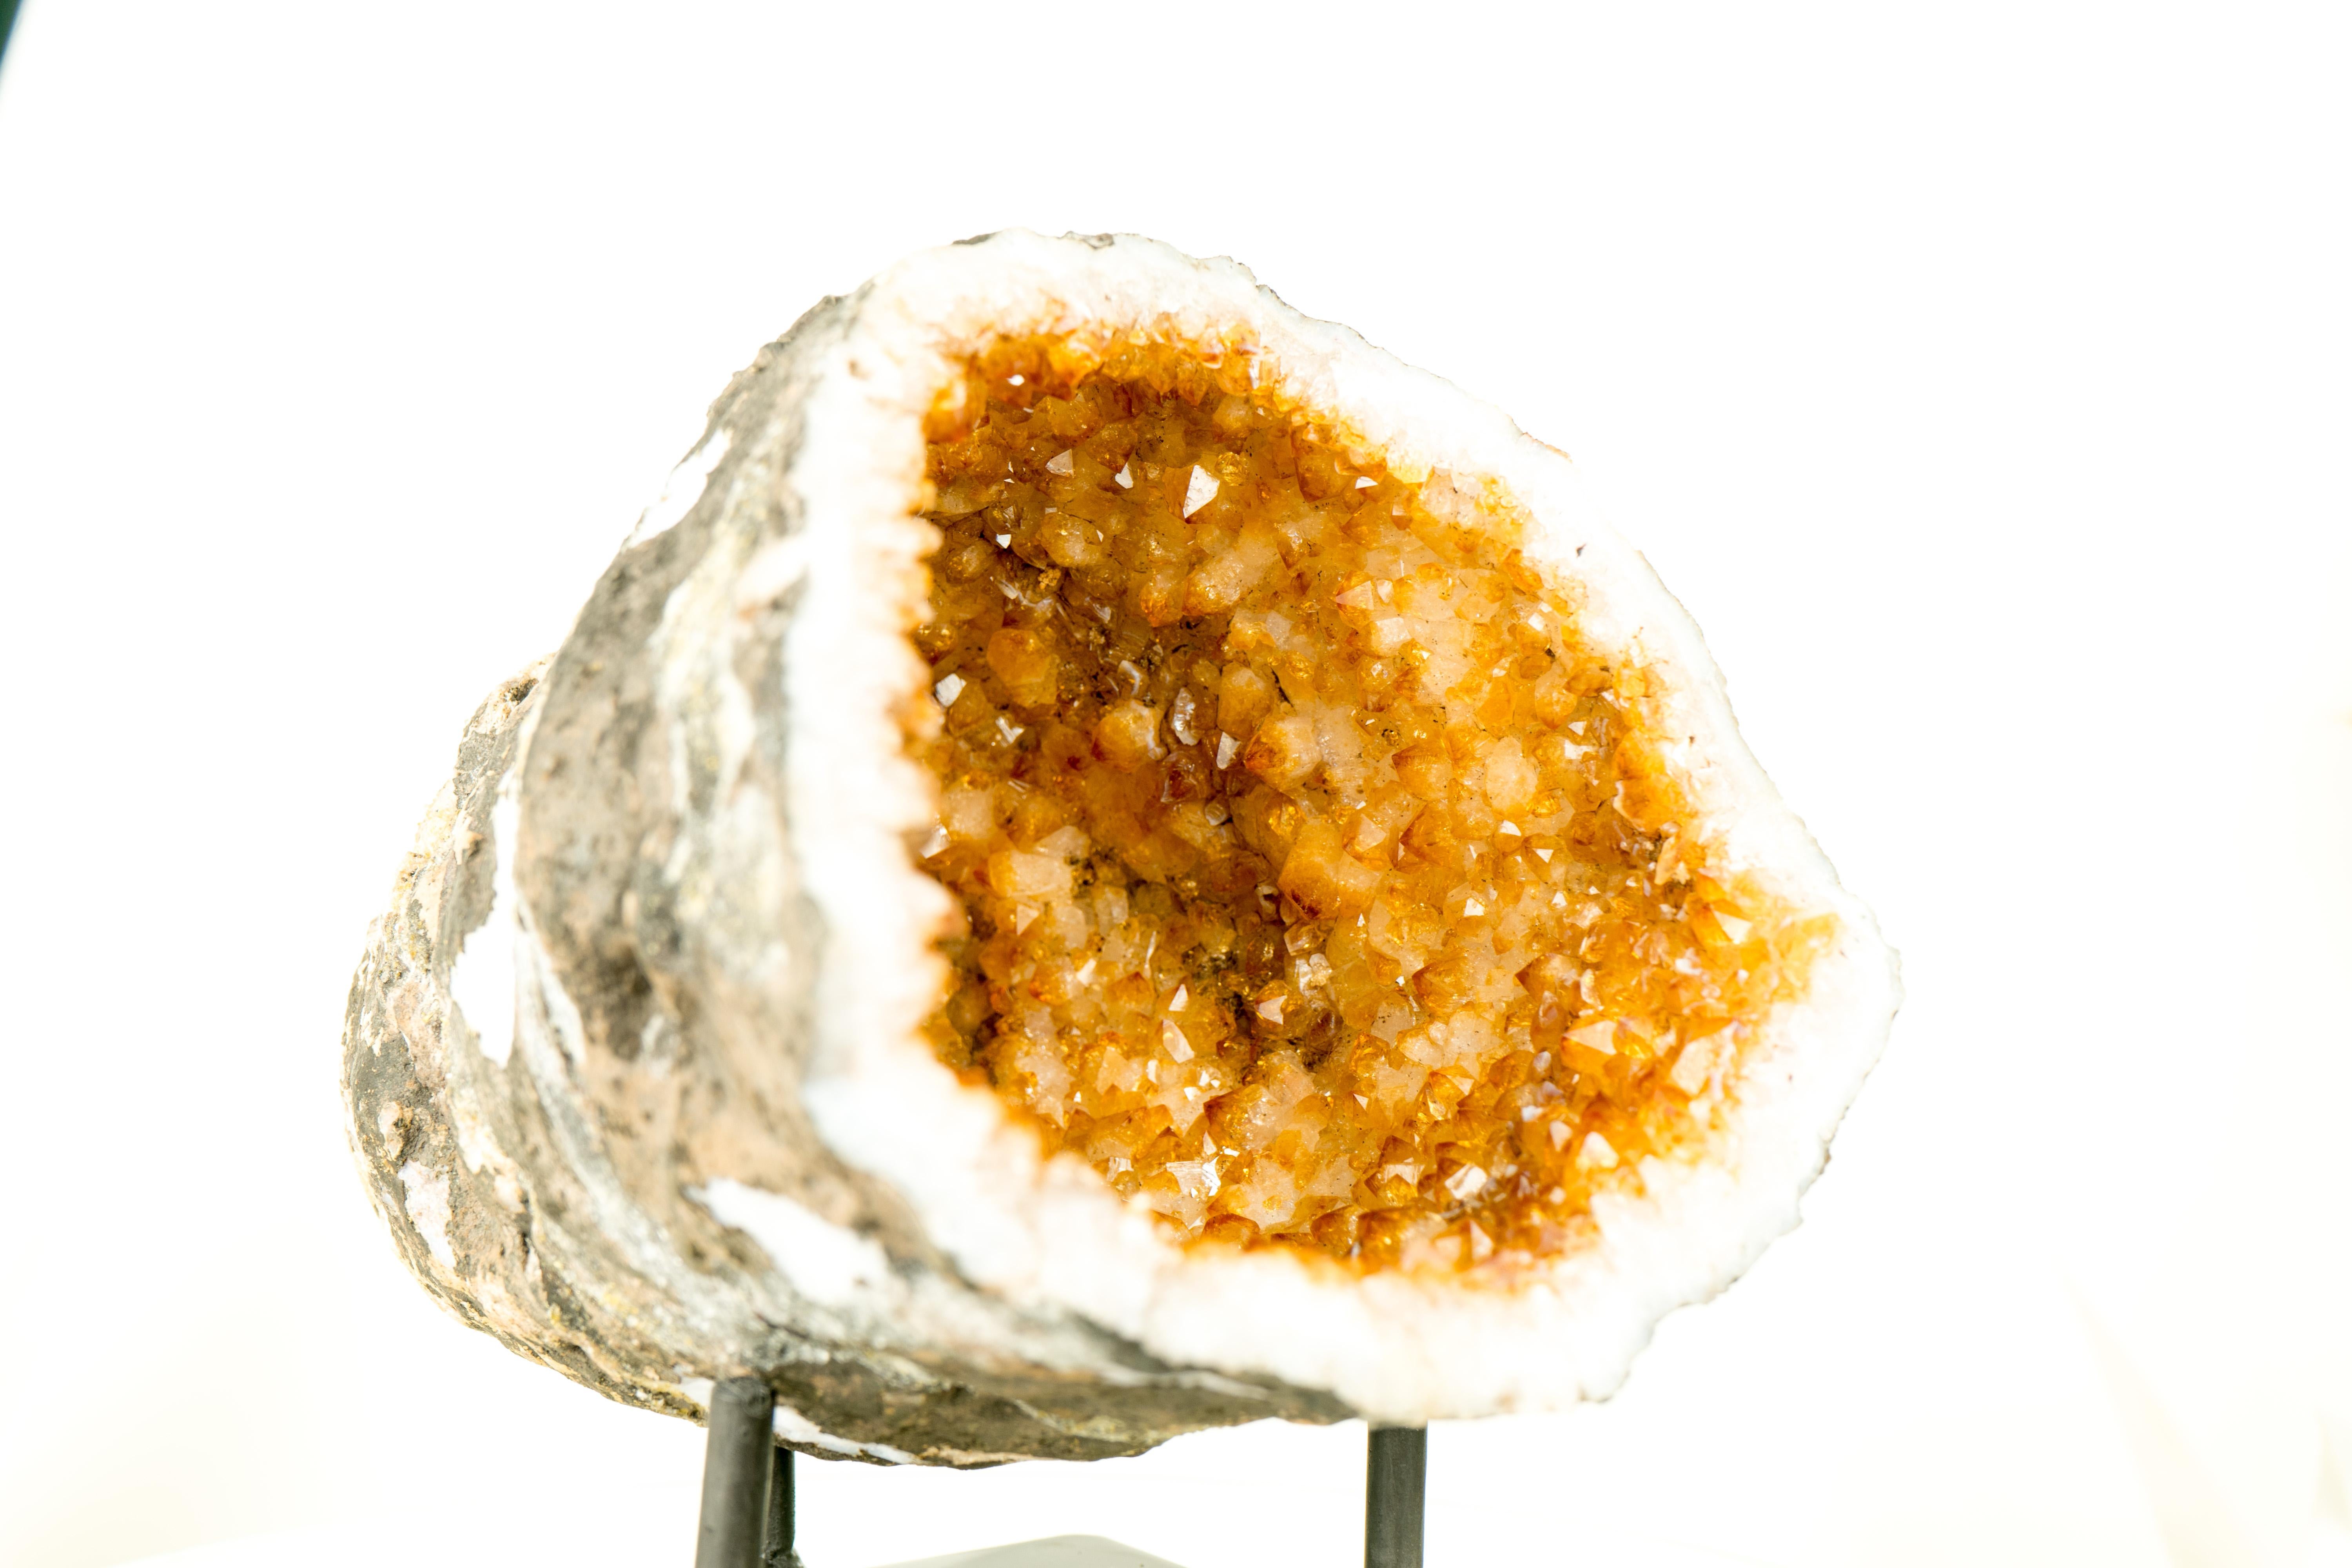 With its golden orange color tone and natural, beautiful cave-like shape, this Citrine Geode is a gorgeous small specimen that showcases rare and beautiful characteristics. It is undoubtedly a stunning Citrine that will serve as a remarkable accent